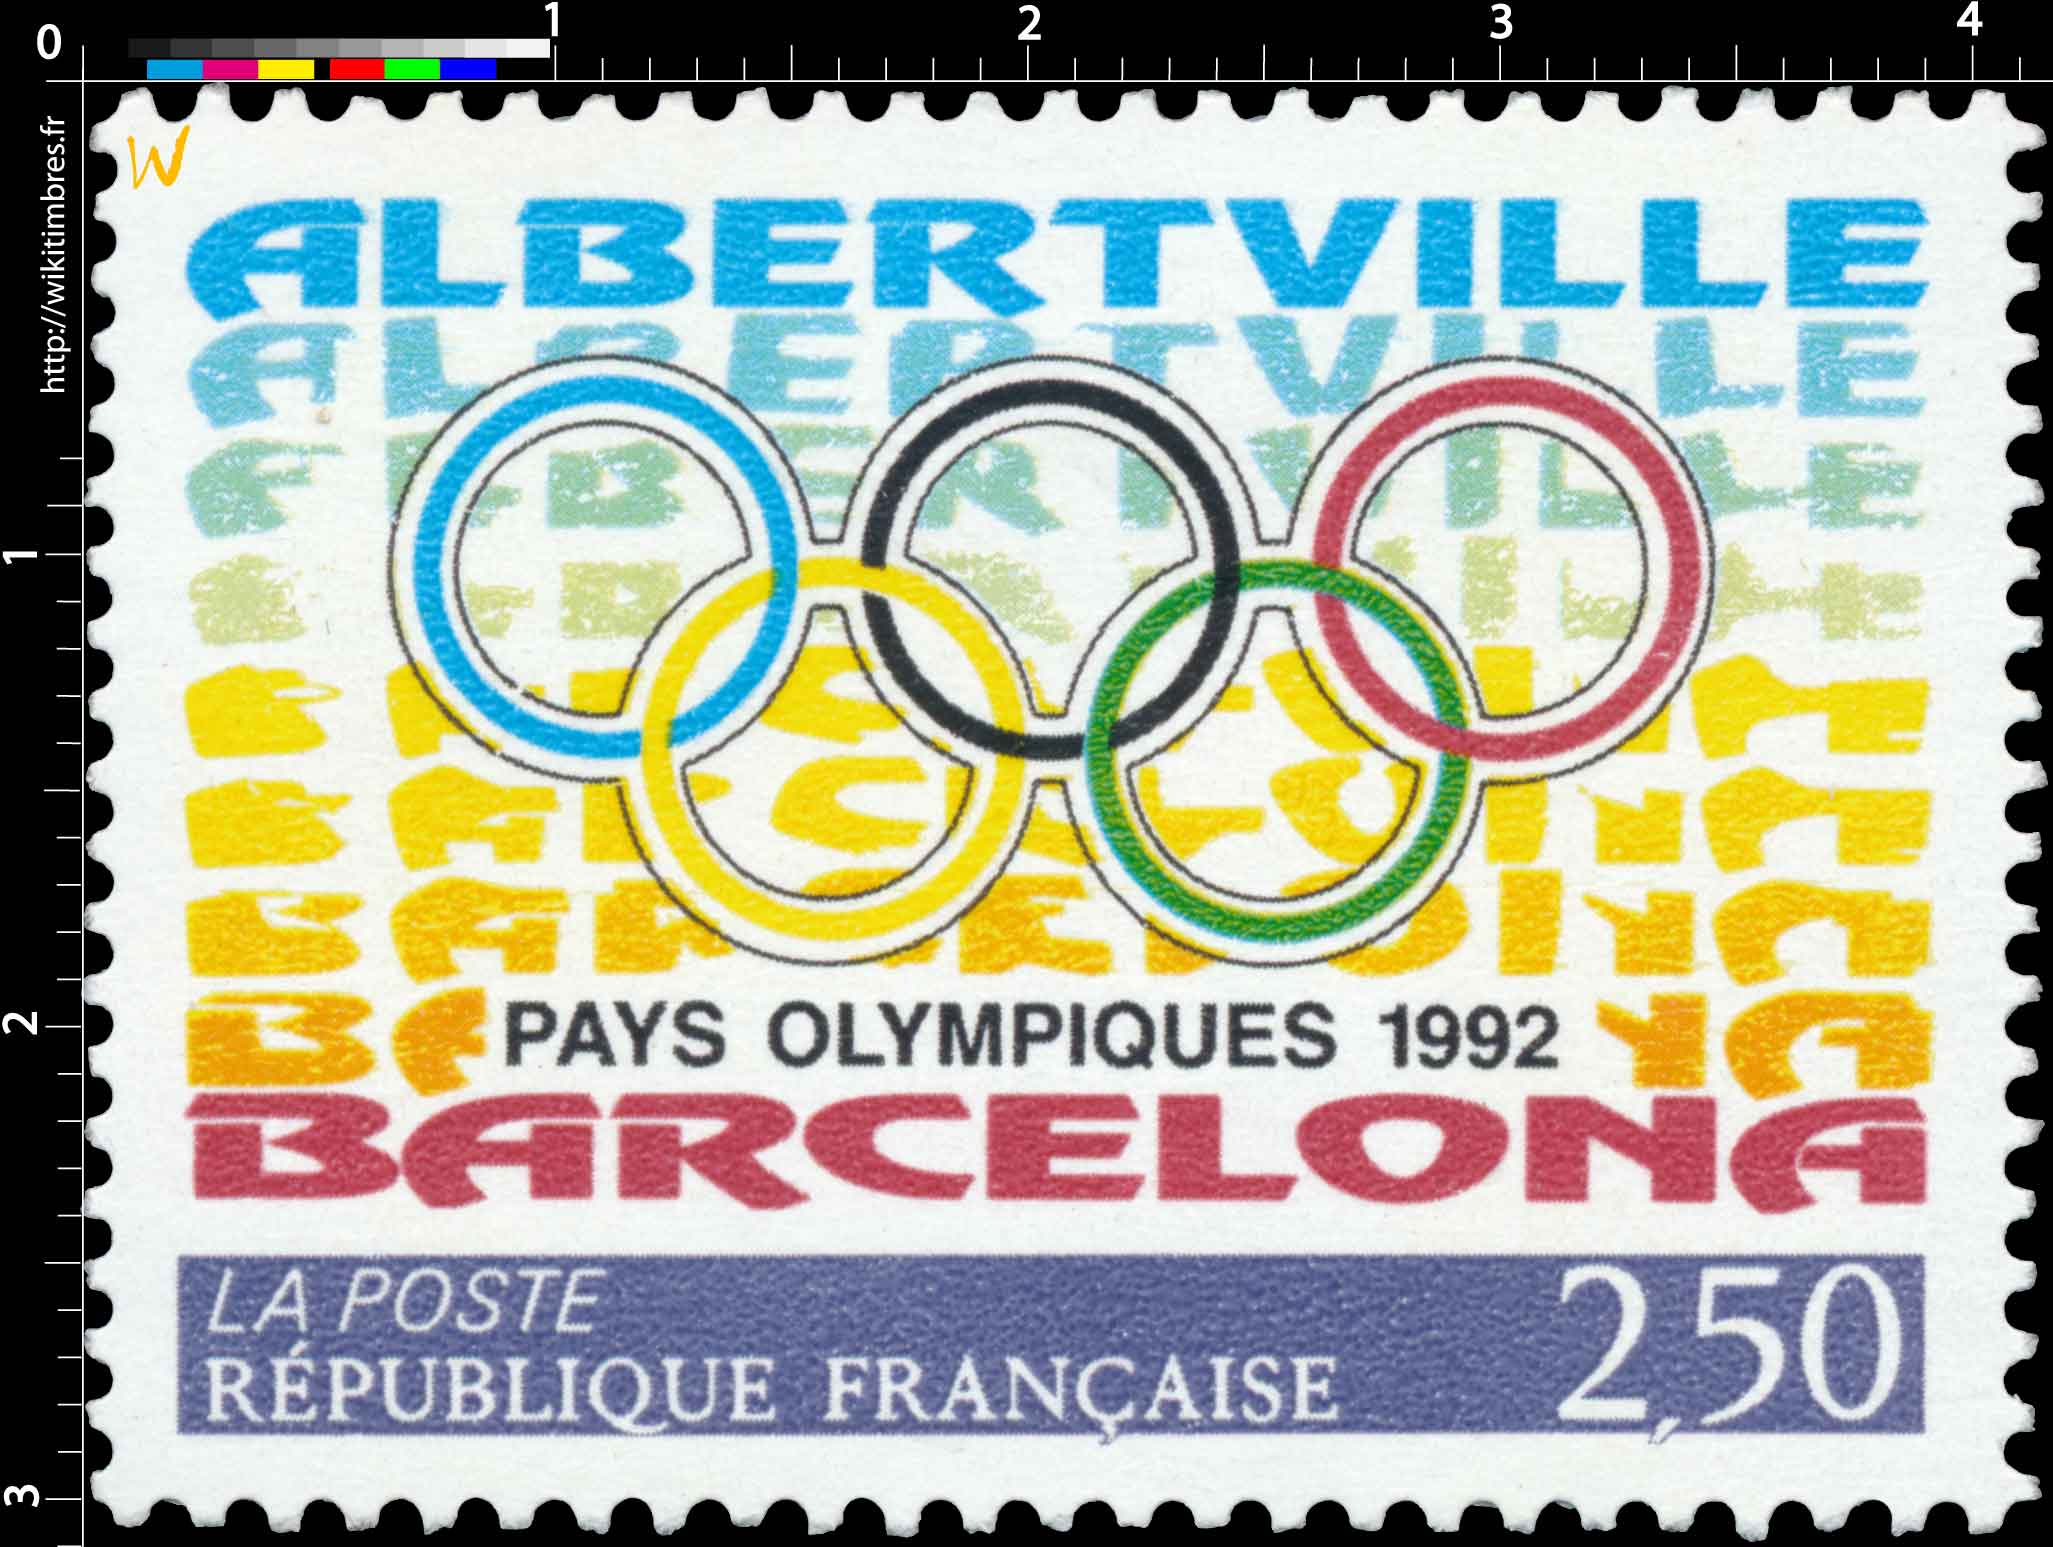 ALBERTVILLE PAYS OLYMPIQUES 1992 BARCELONA